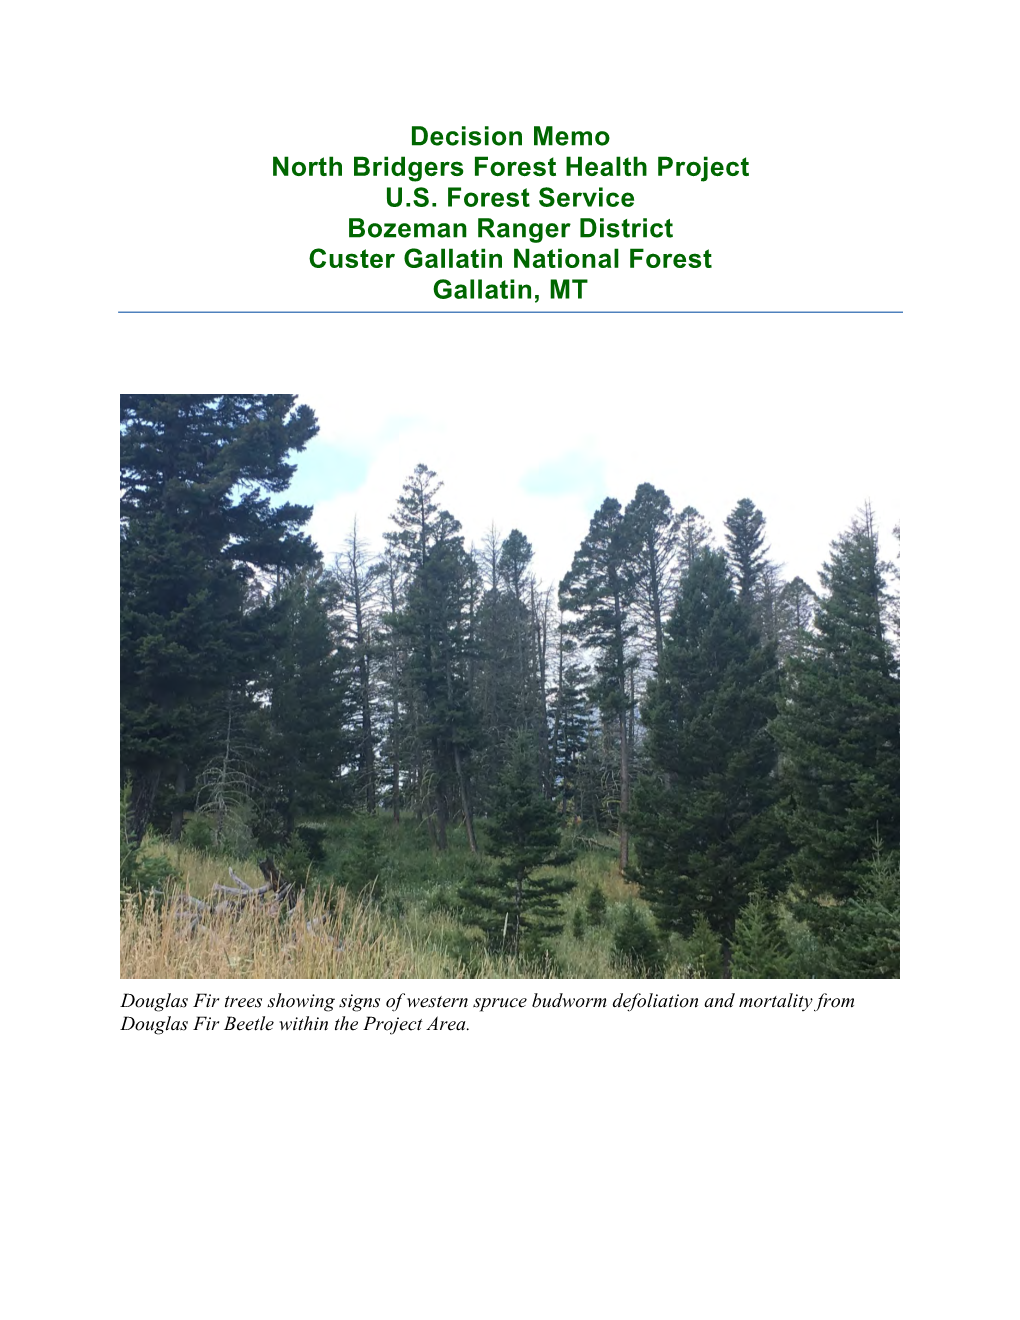 Decision Memo North Bridgers Forest Health Project U.S. Forest Service Bozeman Ranger District Custer Gallatin National Forest Gallatin, MT